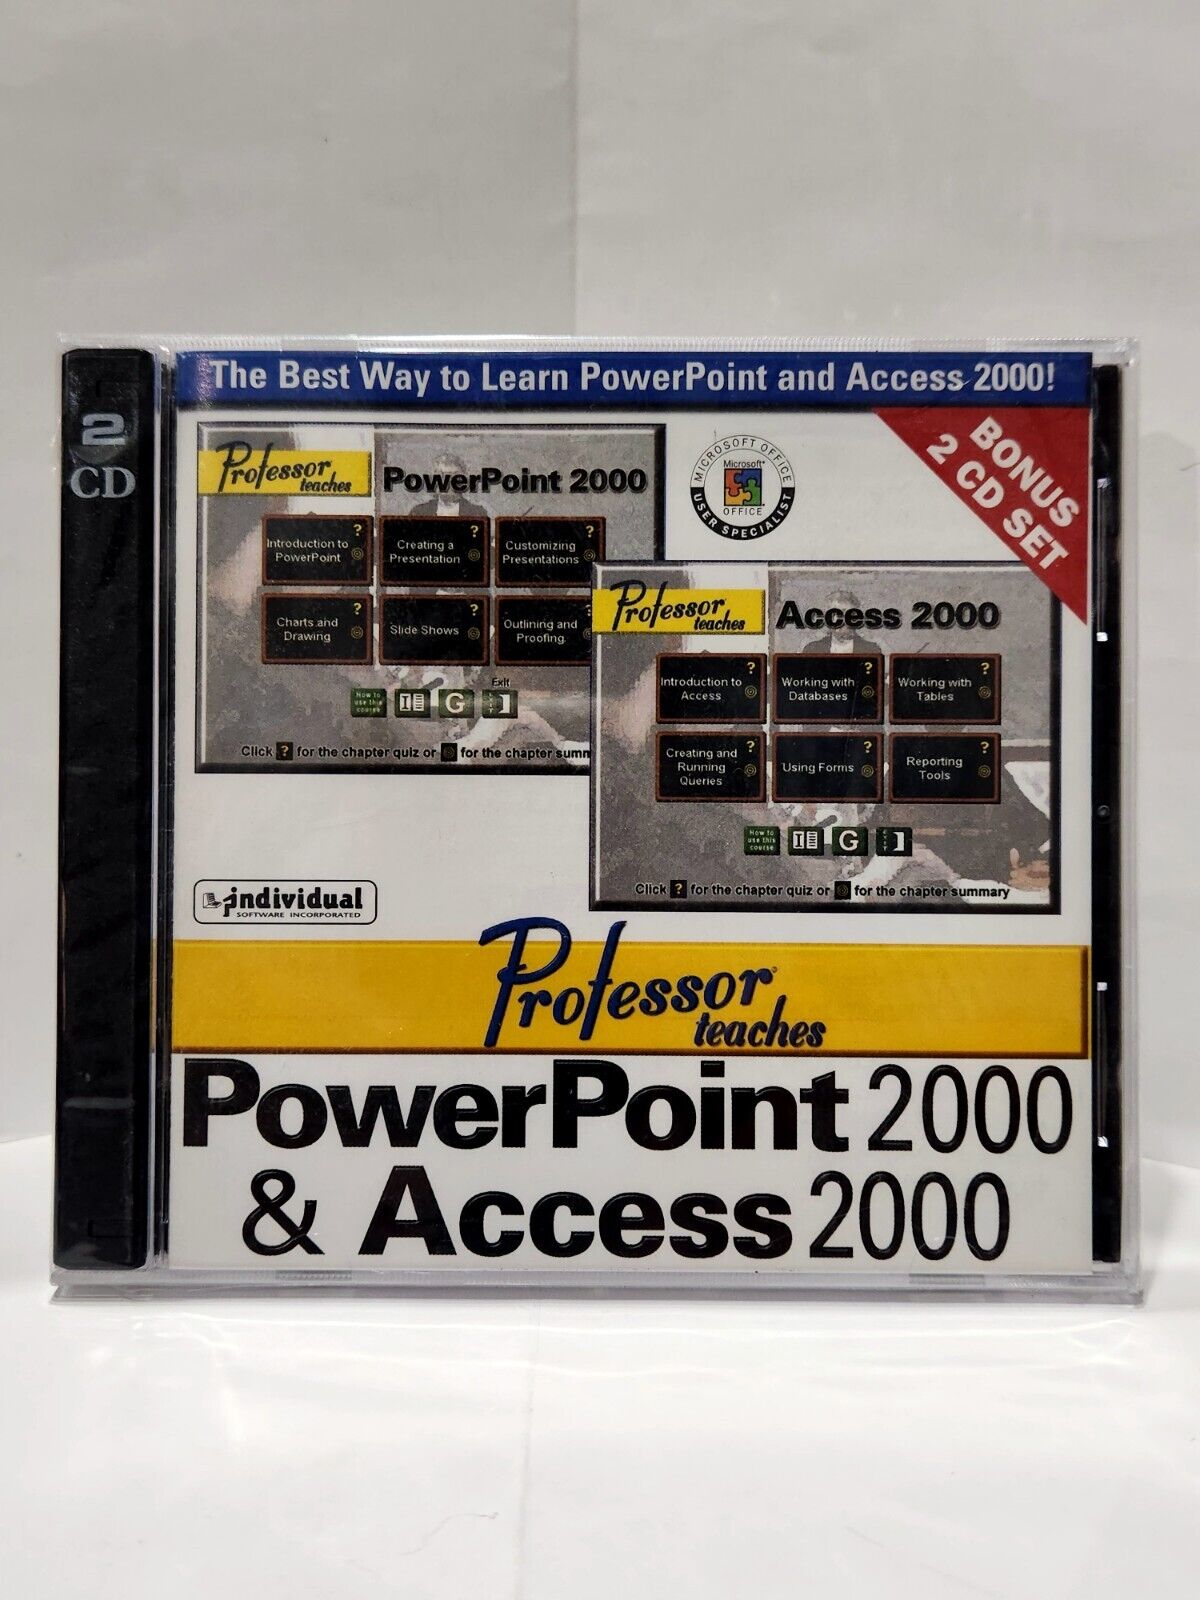 Professor Teaches The Best Way to Learn PowerPoint & Access 2000 Sealed 